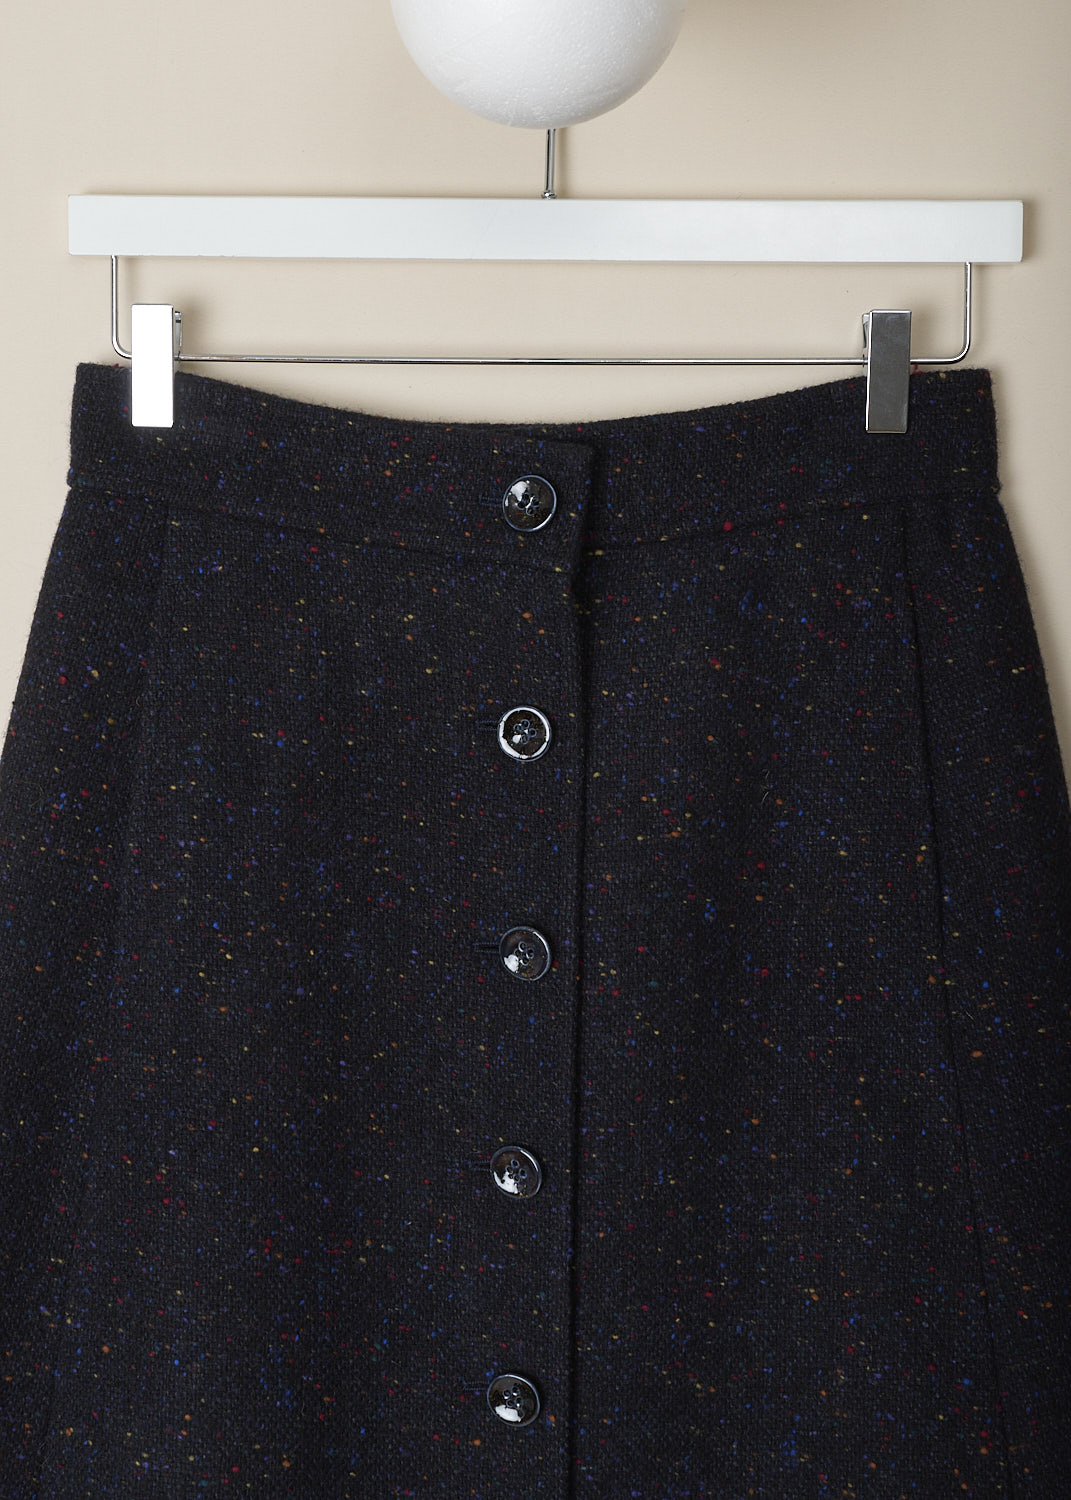 CHLOÃ‰, SPECKLED A-LINE SKIRT, CHC22AJU461654D2_ANTHRACITE_BLUE, Blue, Print, Grey, Detail, This maxi A-line skirt has an anthracite blue base color with multicolored speckles throughout. The skirt has a front button closure. The skirt has slanted pockets. ,
